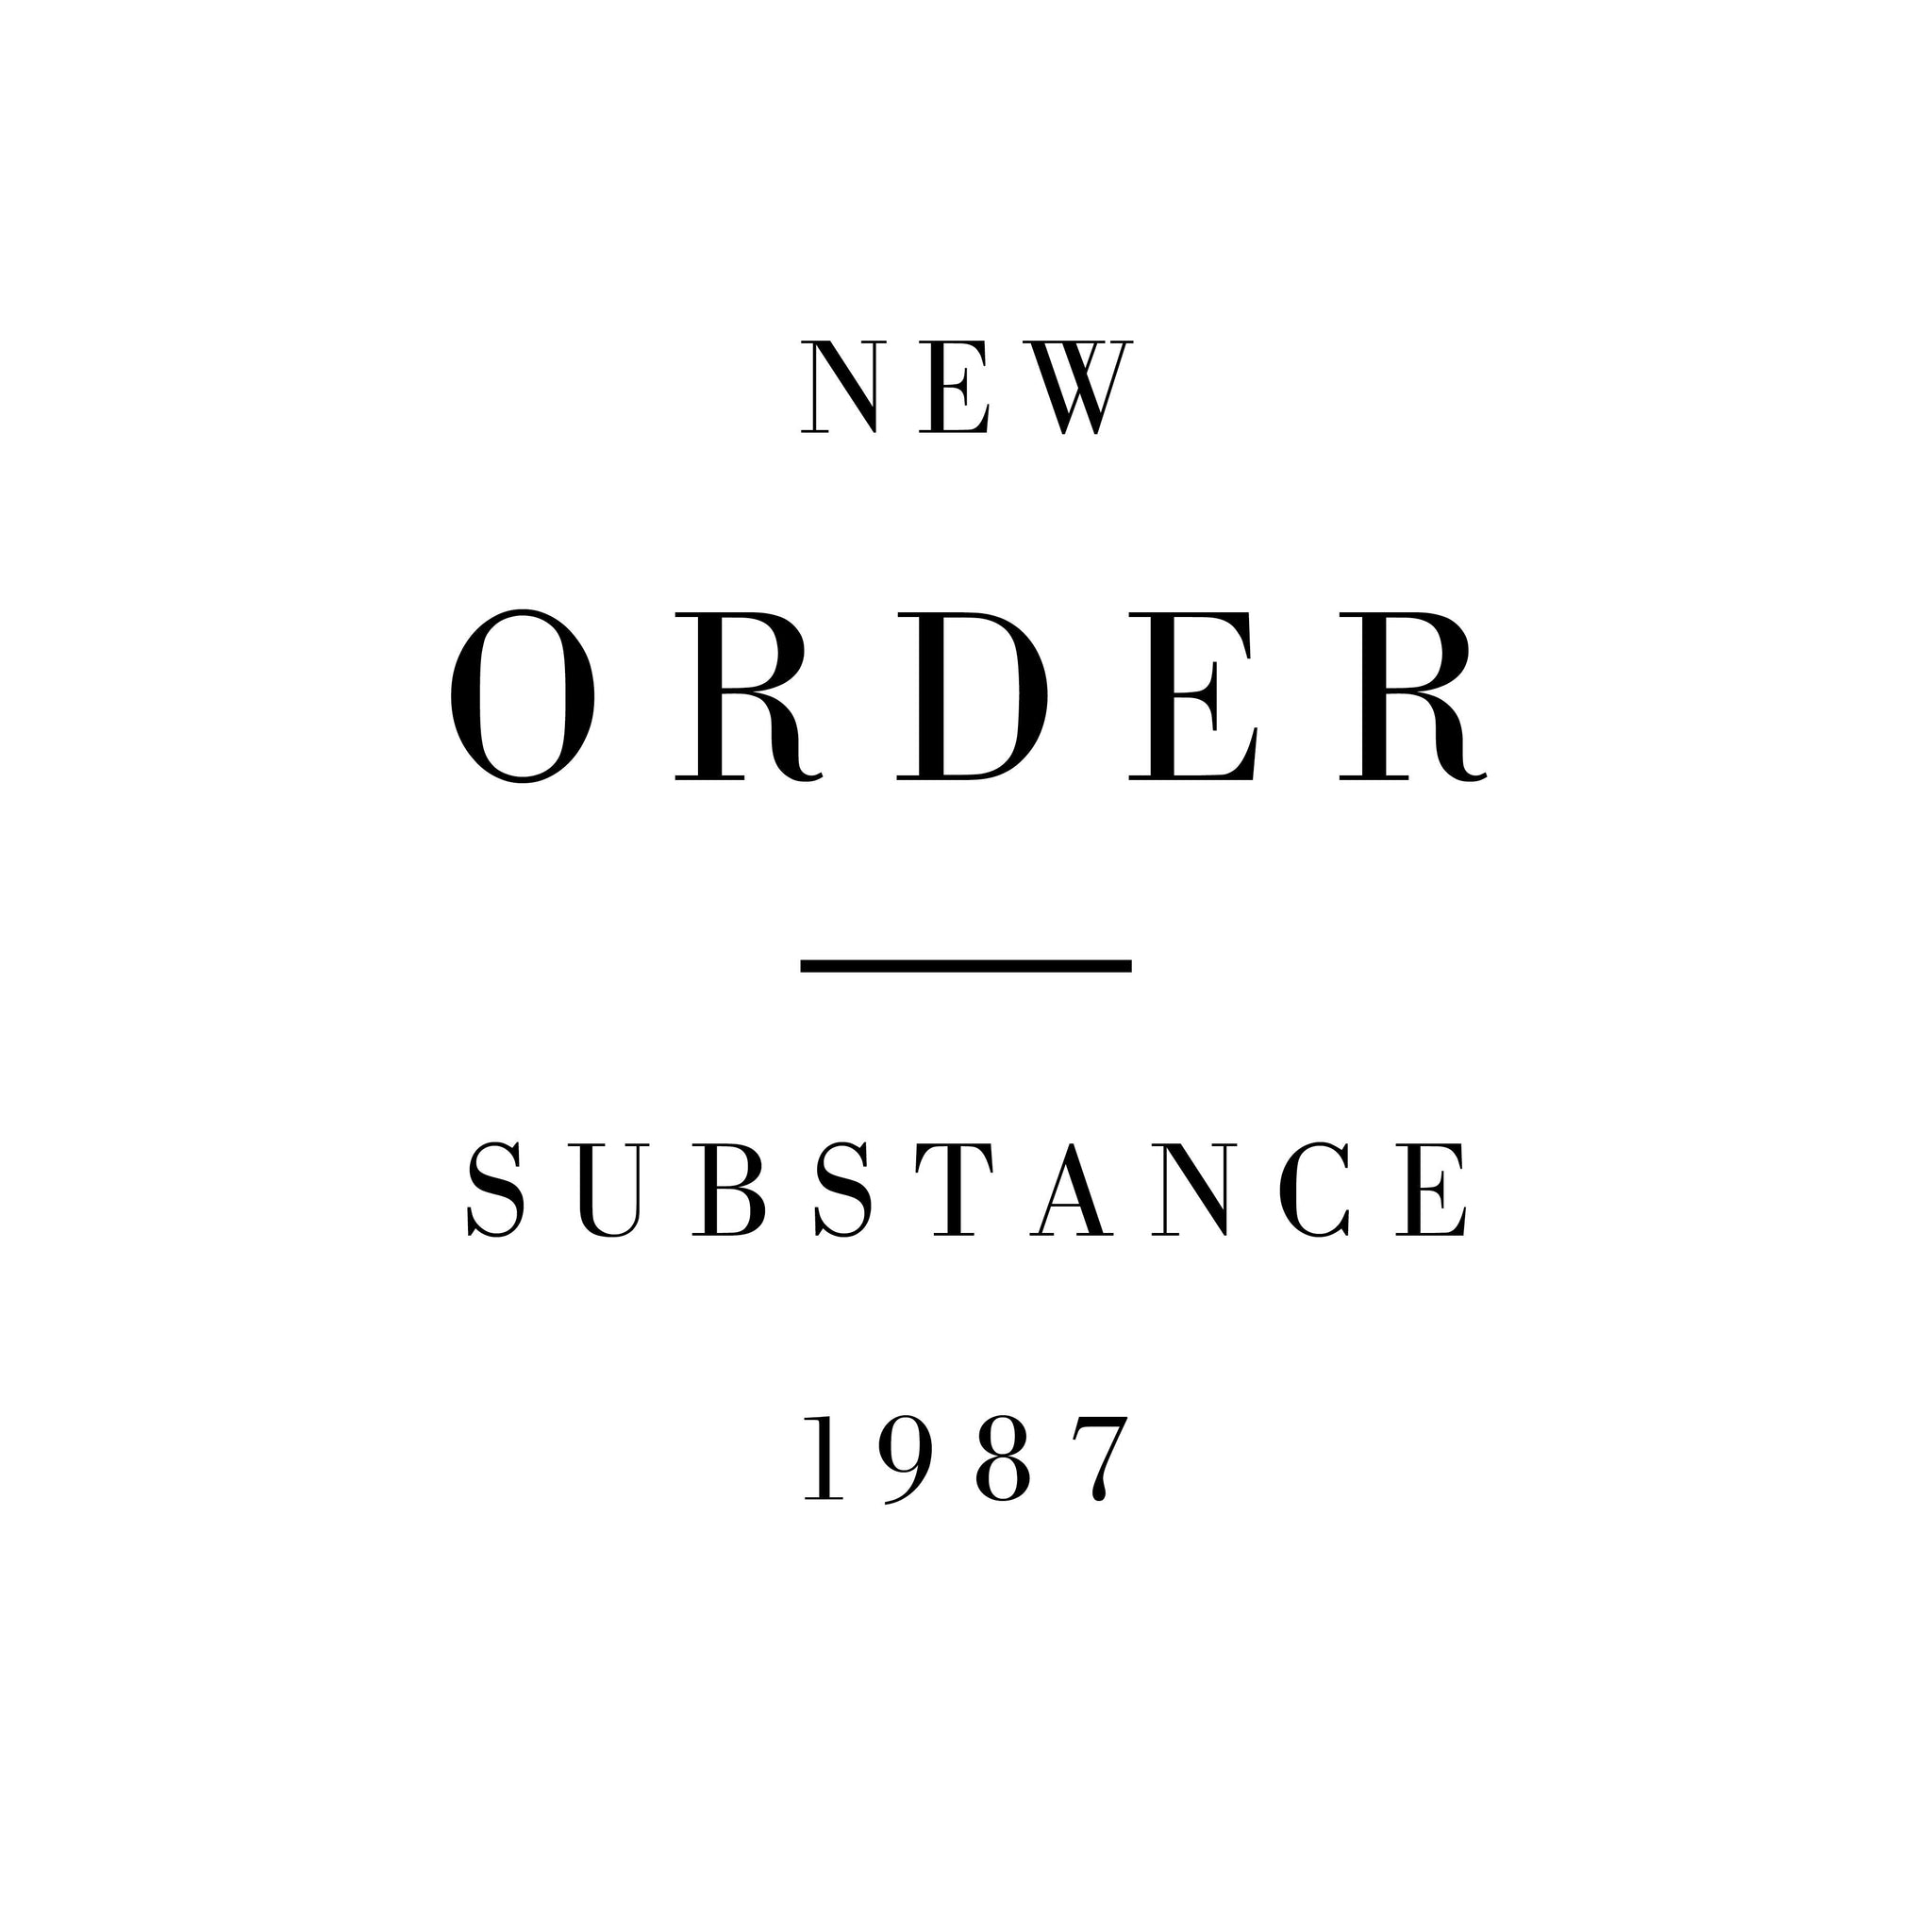 NEW ORDER - Substance '87 (Remastered) - Deluxe 4CD